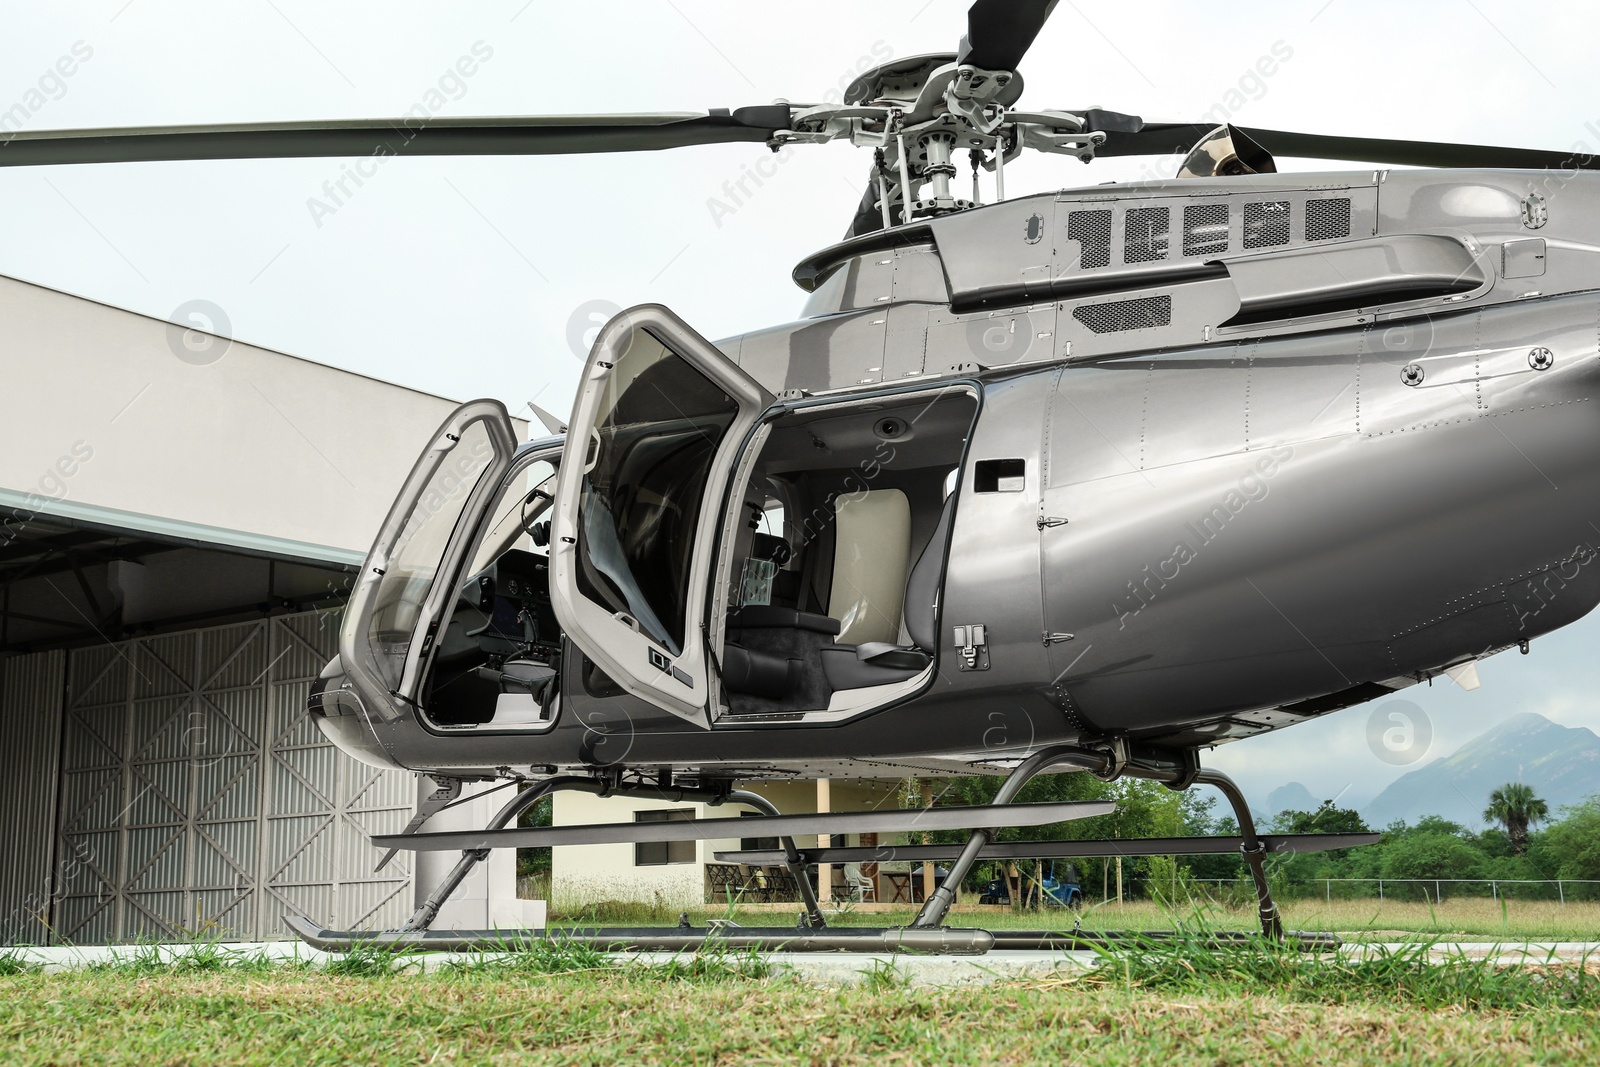 Photo of New helicopter with open cabin doors on helipad outdoors